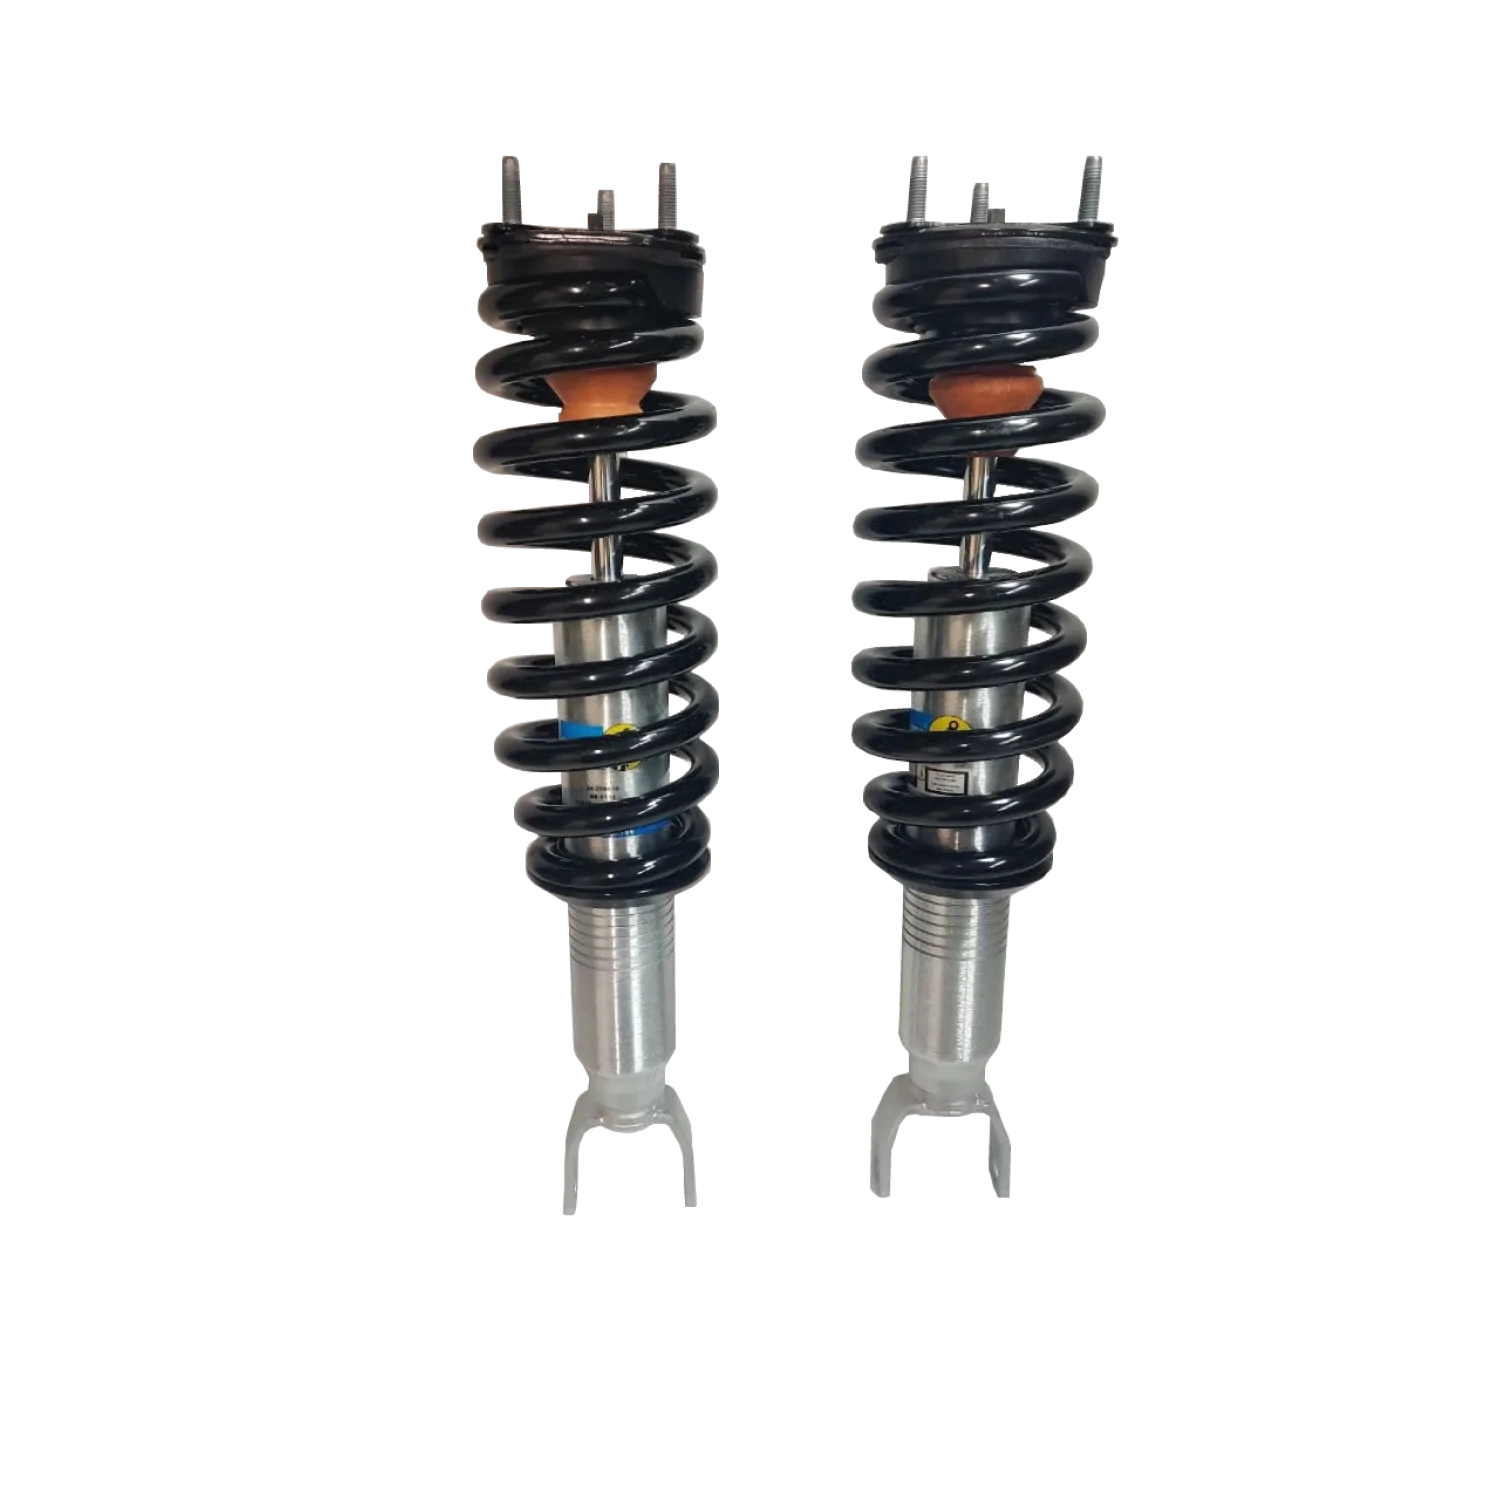 Bilstein 6112 0.6-2.6" Front Lift Assembled Coilovers for 2019-2022 Ram 1500 2WD/4WD